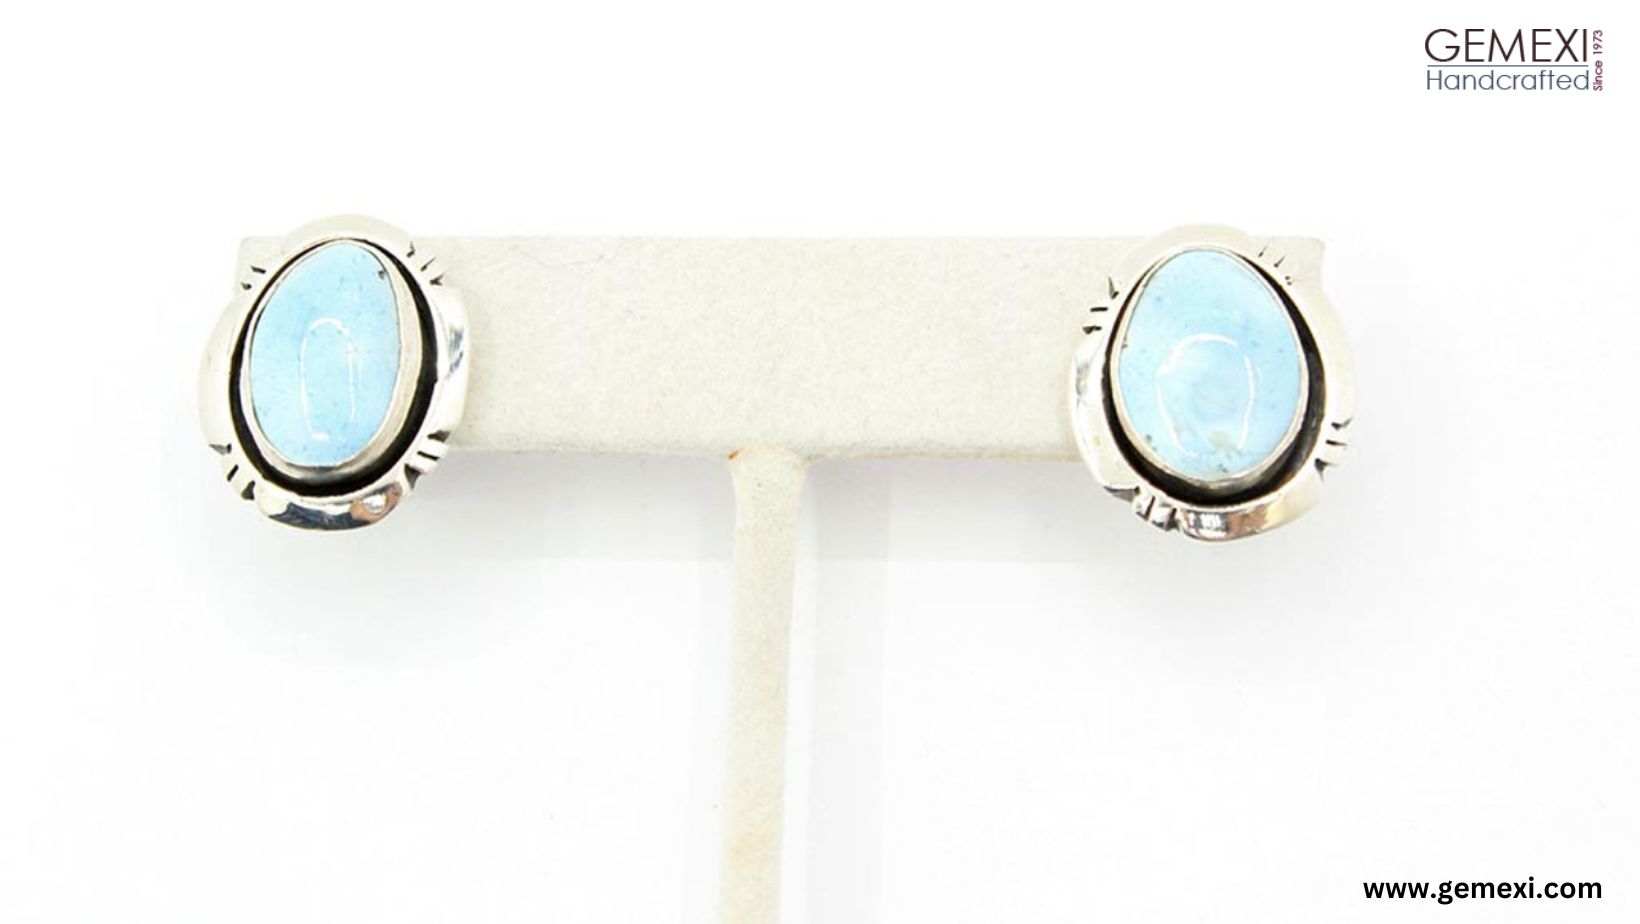 Care Guide for Golden Hills Turquoise Jewelry Preserving its Radiant Appeal